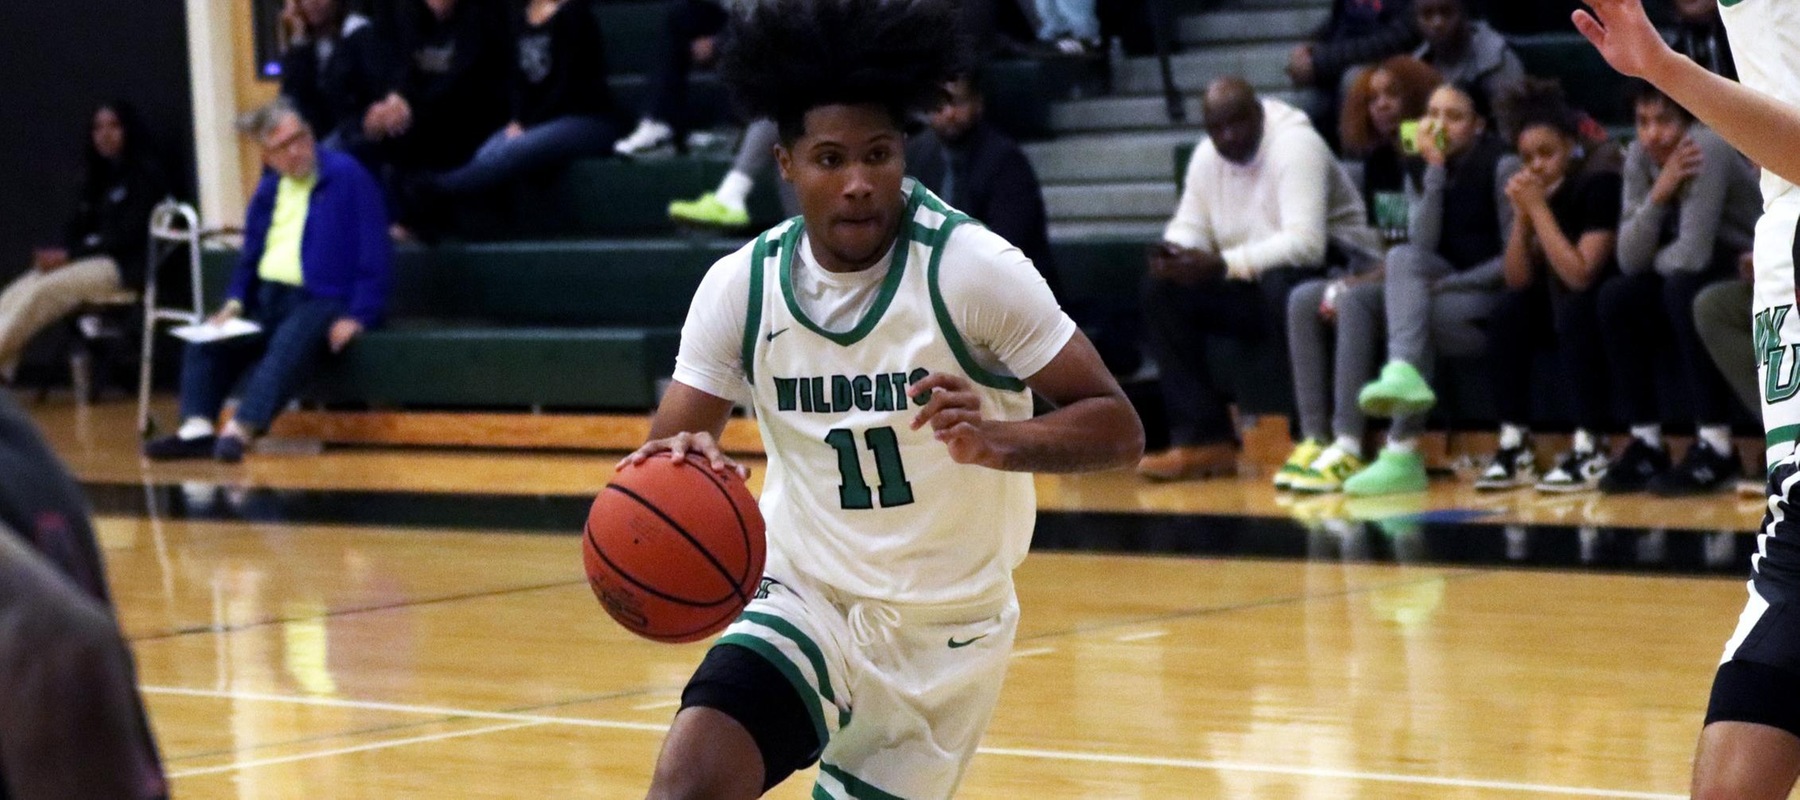 File photo of Marcus Pierce who had 11 points and 5 assists at Saint Rose in the 2023-24 season opener. Copyright 2023; Wilmington University. All rights reserved. Photo by Dan Lauletta. February 15, 2023 vs. Queens.